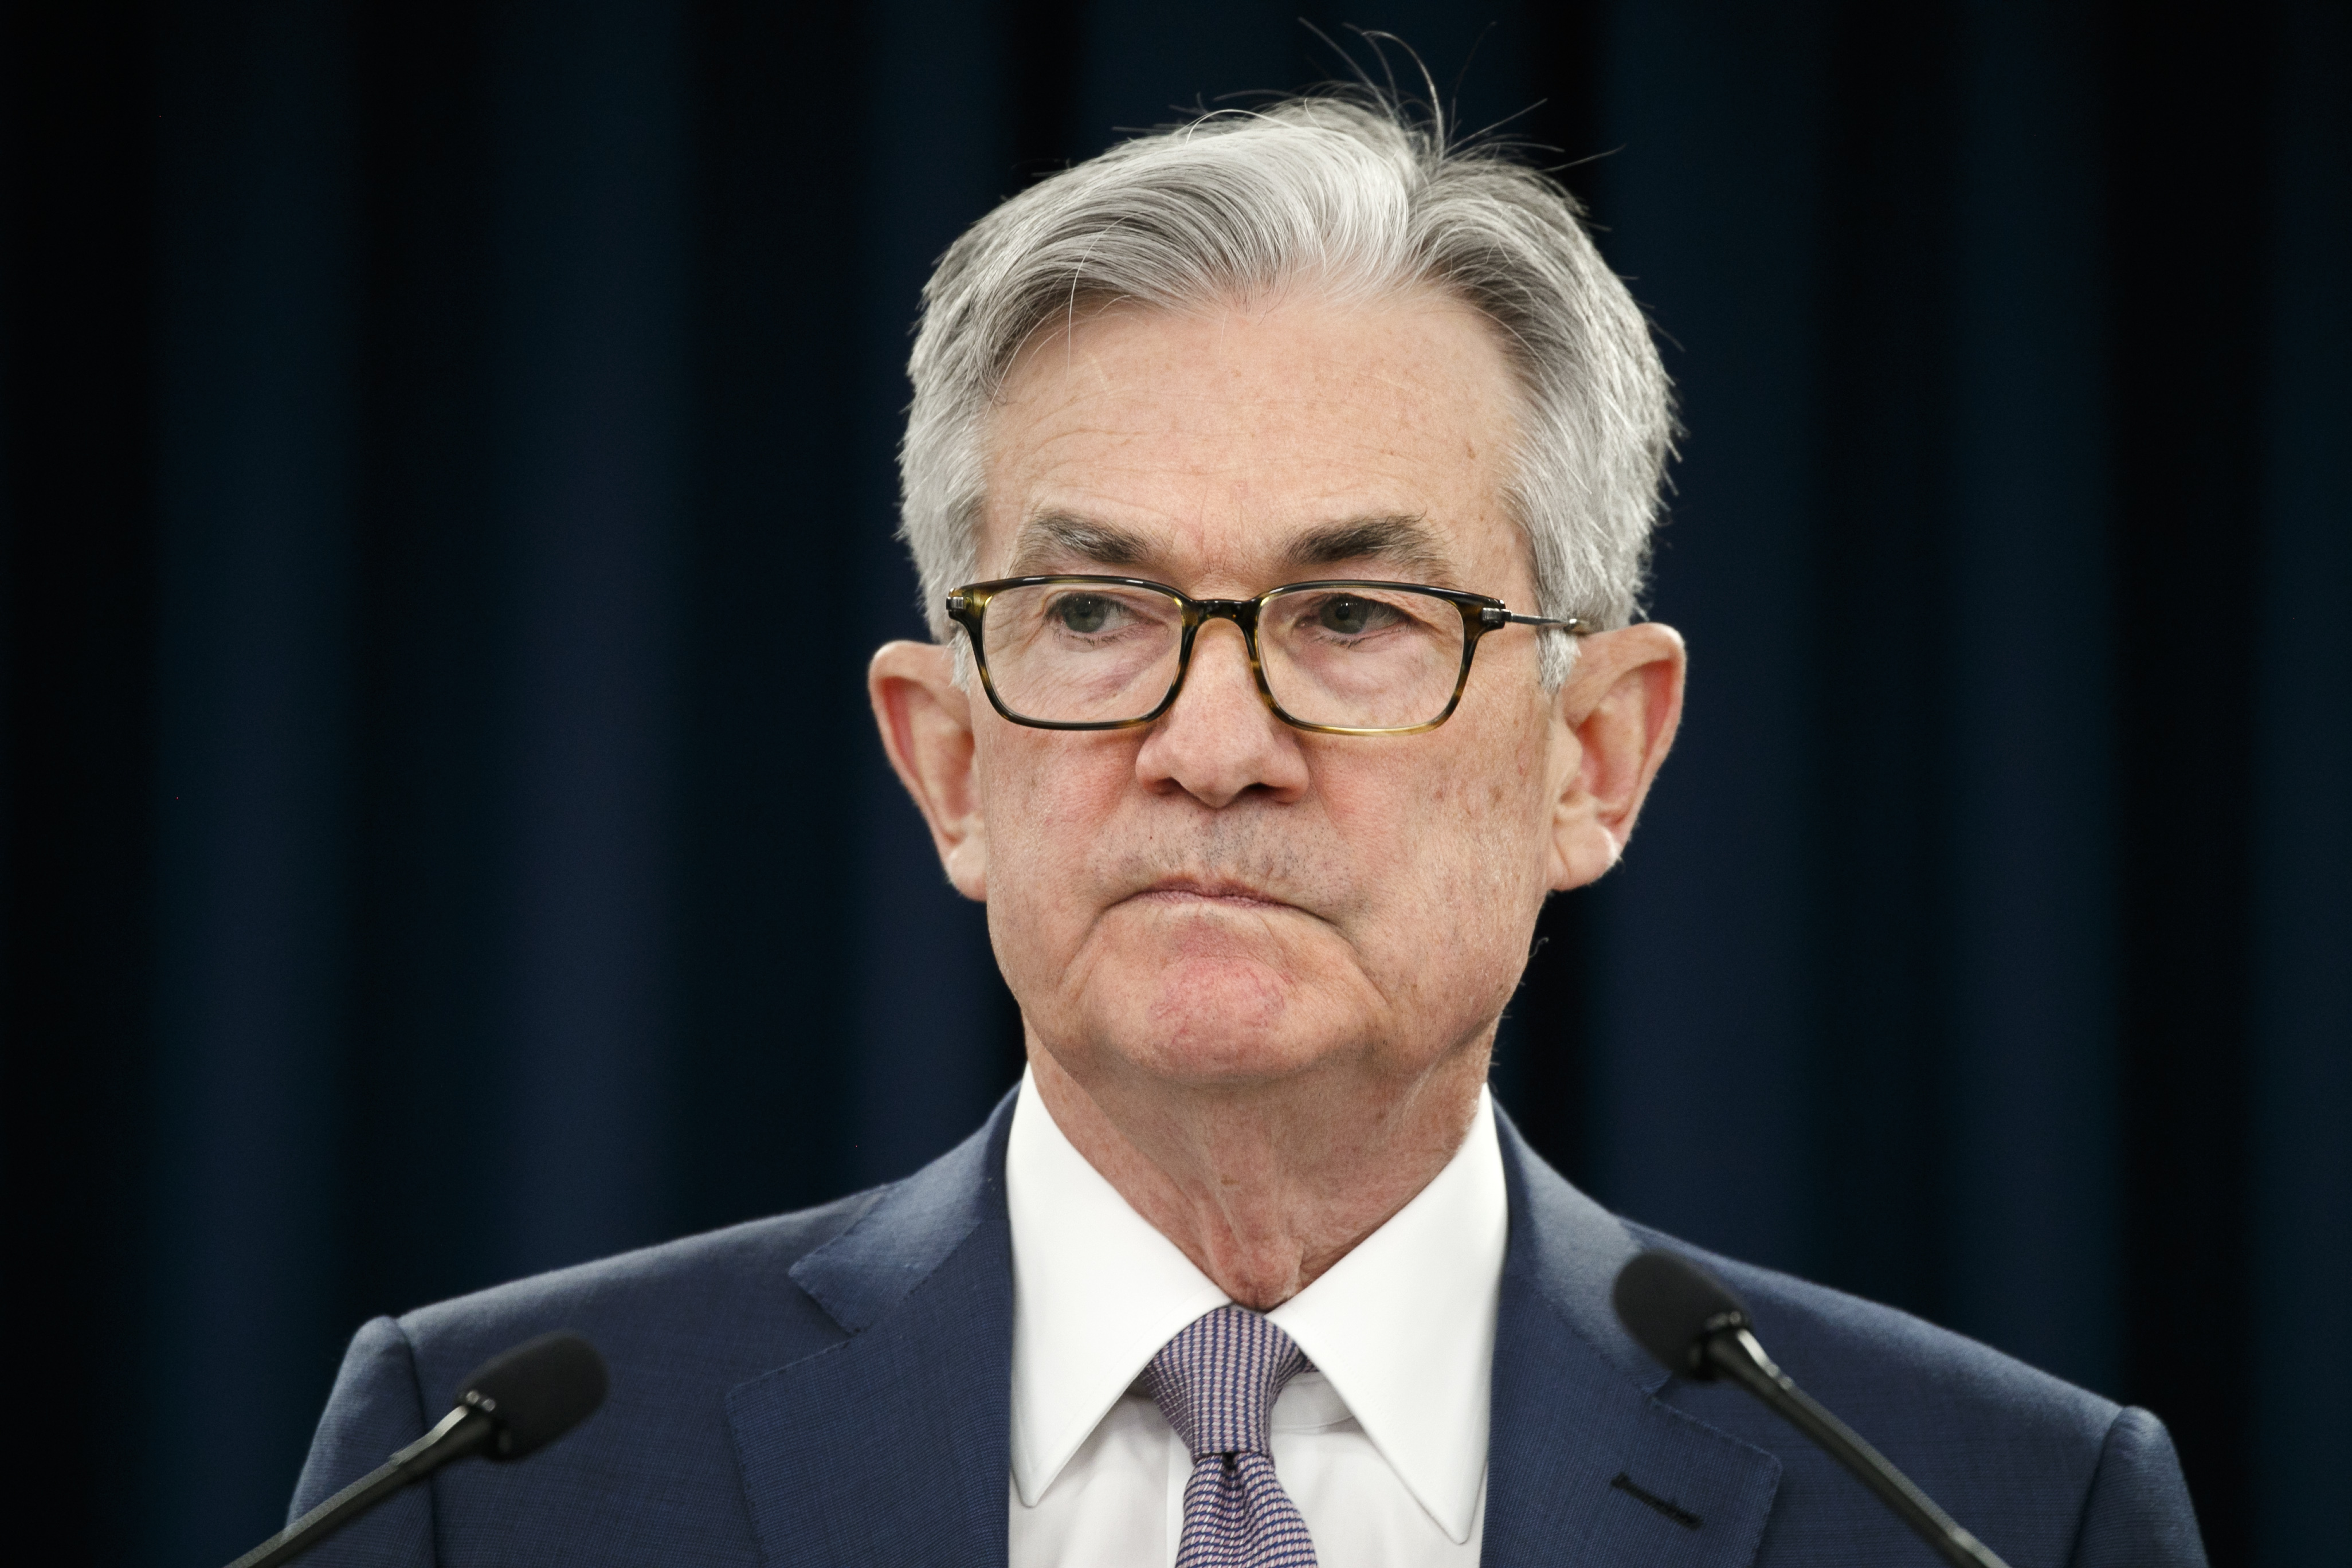 Jerome Powell, the chair of the US Federal Reserve, holds a news conference in Washington on March 3.